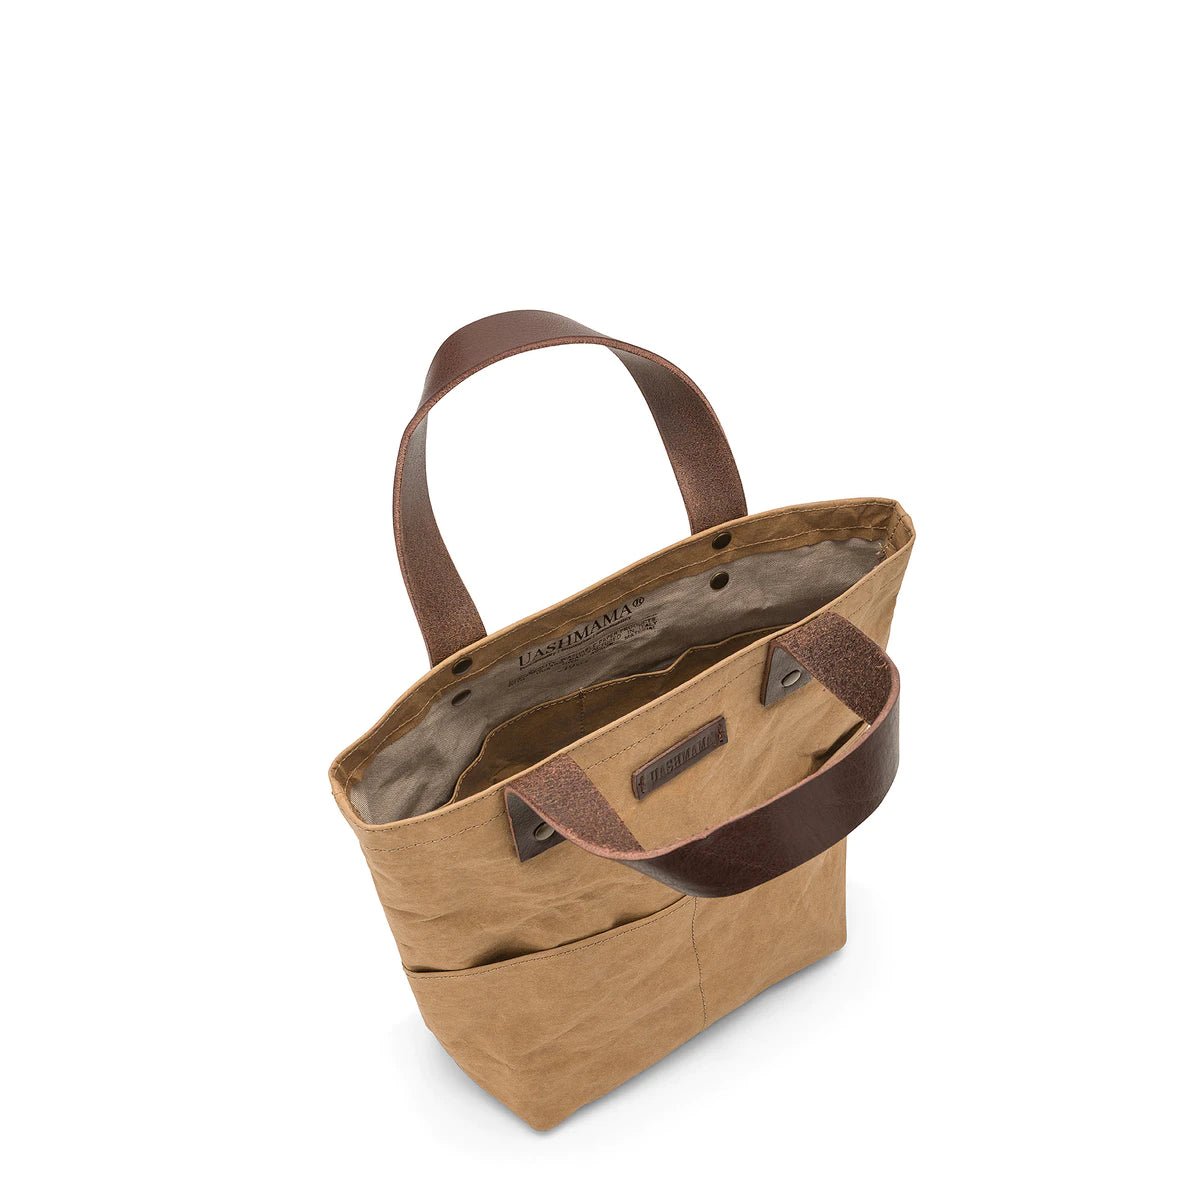 A top down view of a brown washable paper tote bag showing inside pockets and short brown leather handles